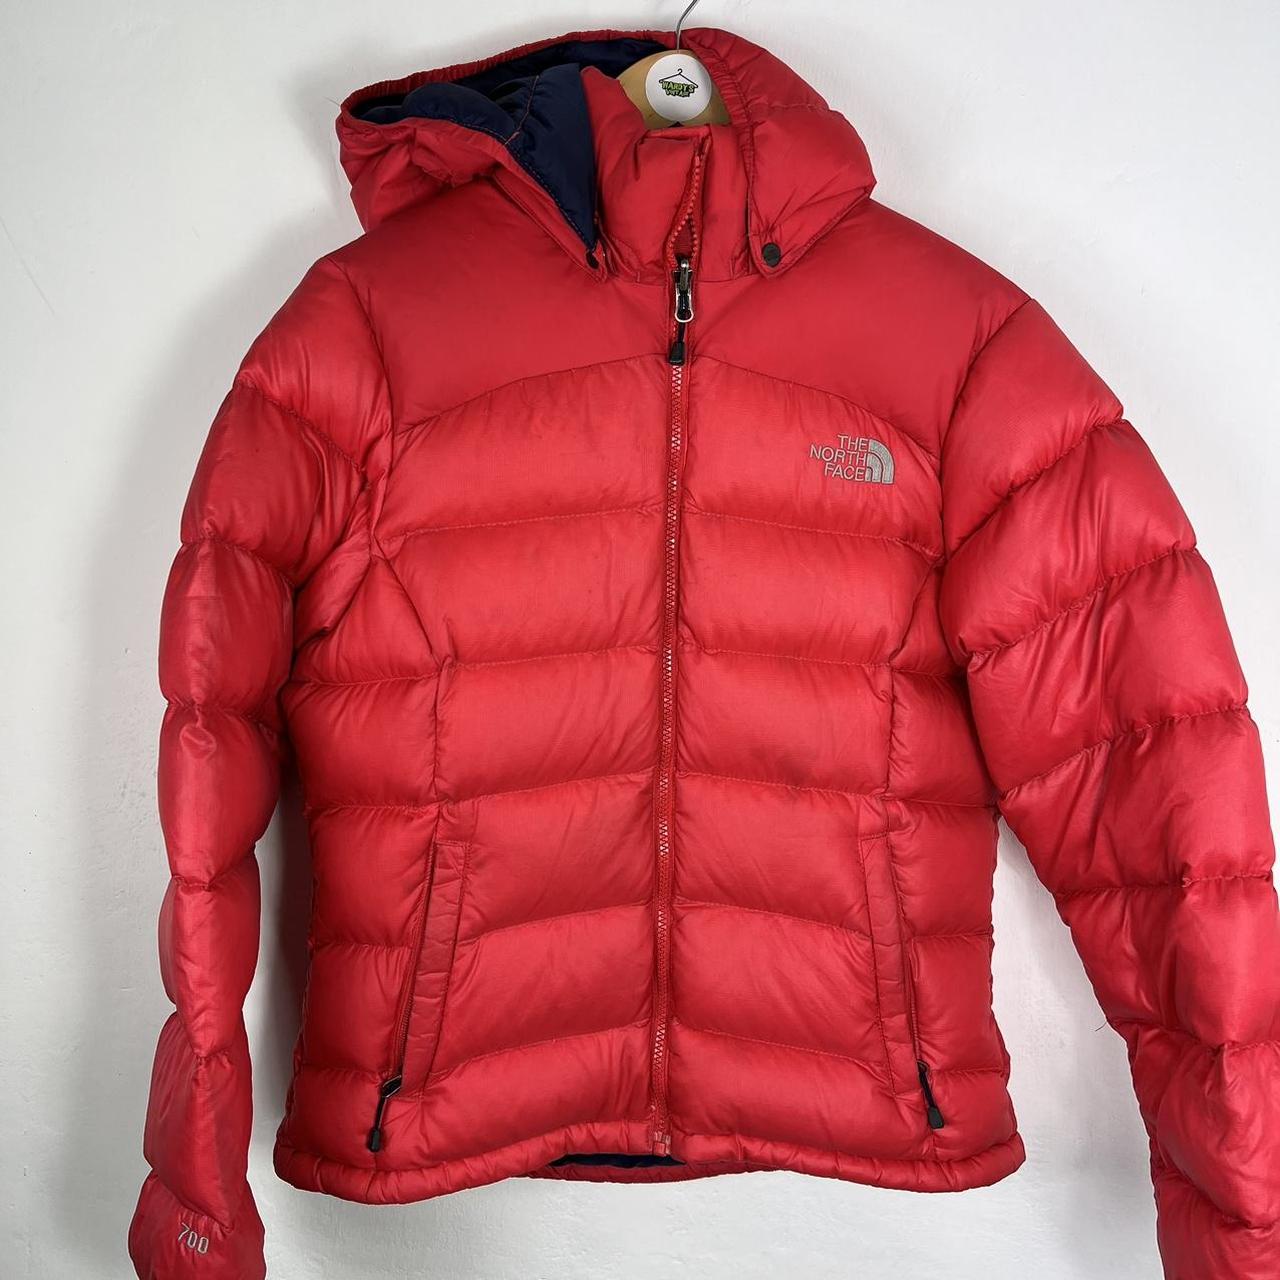 North face puffer jackets men’s small